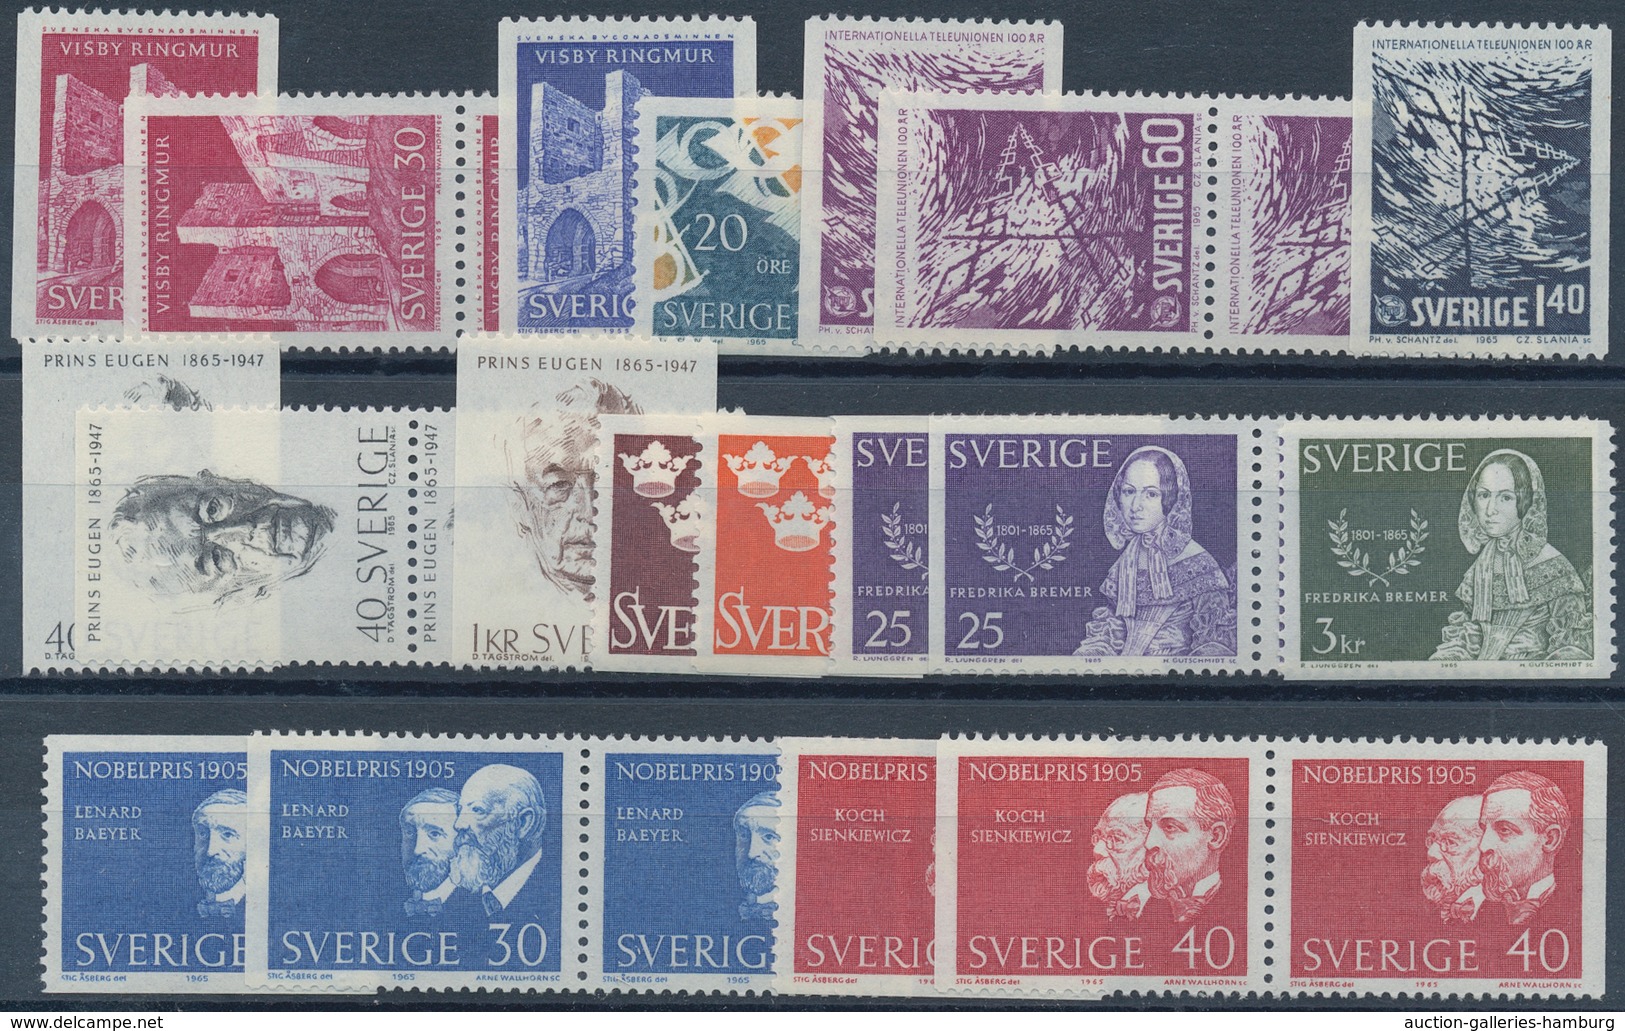 Schweden: 1960/1969, mostly complete year sets mint never hinged, a few perforation versions of defi